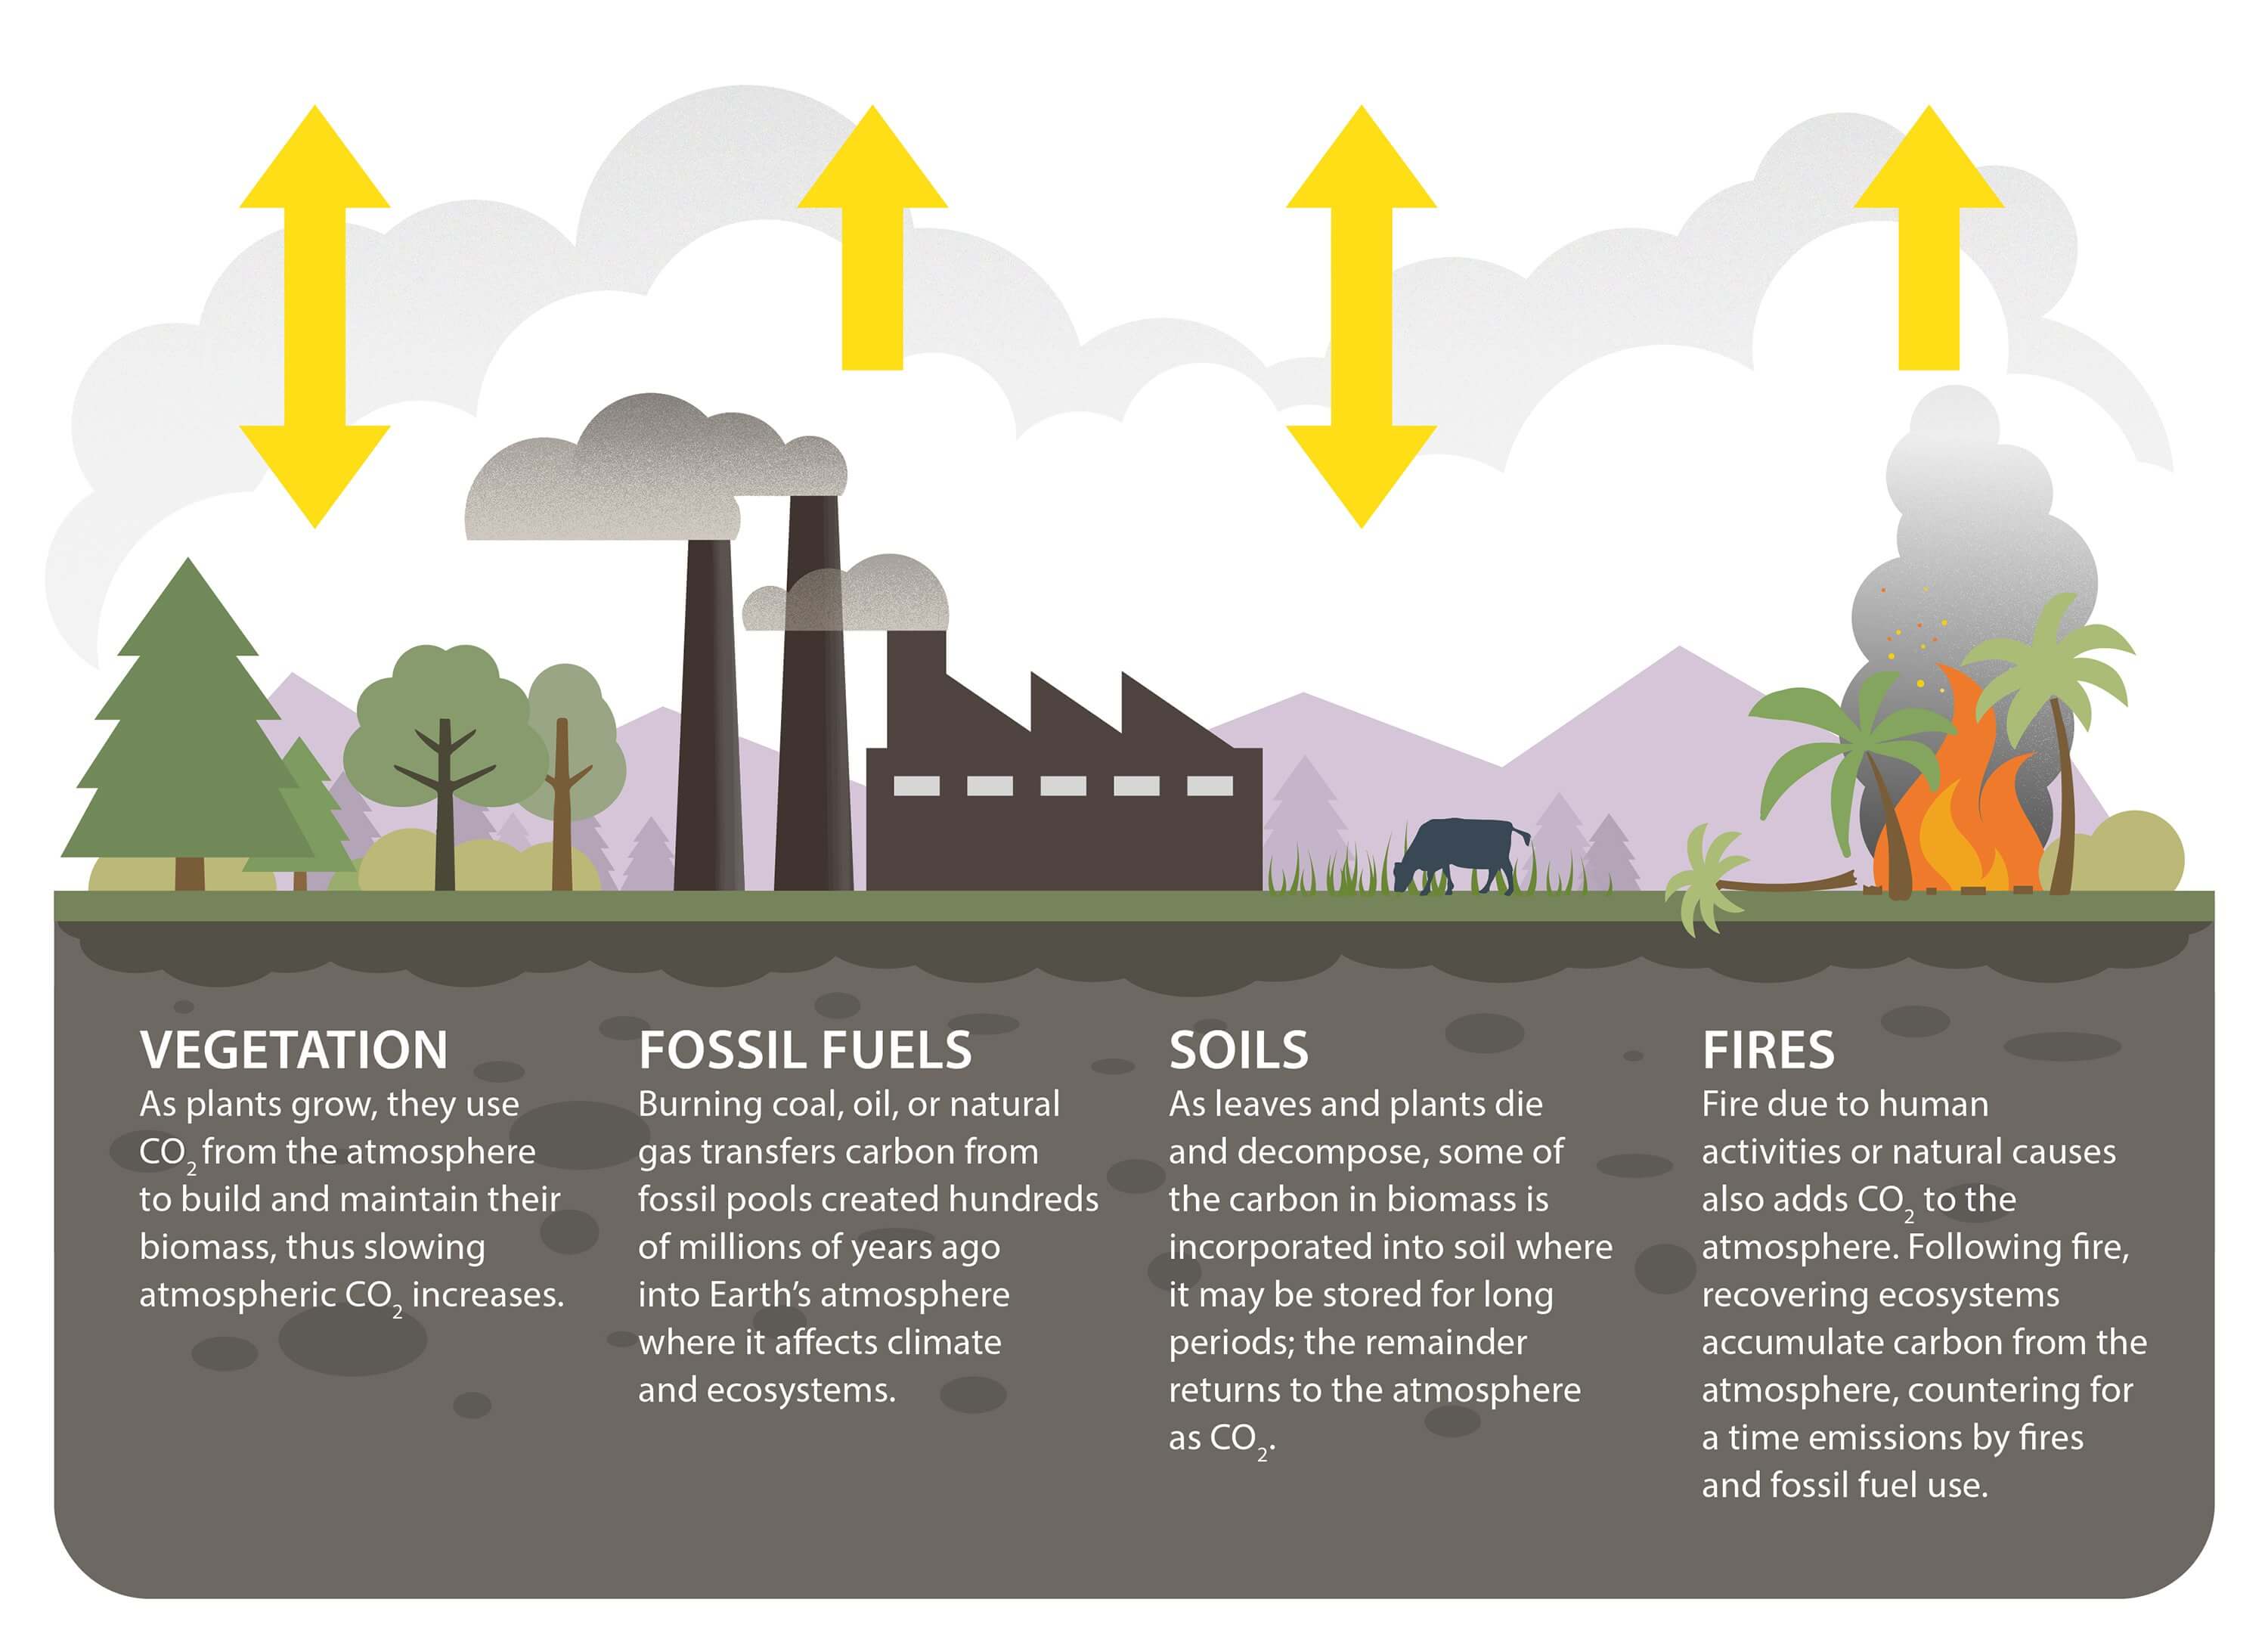 This infographic demonstrates how carbon dioxide cycles through the environment through vegetation, soils, fires, and the burning of fossil fuels. A digital rendering of a flat landscape shows the different sources of carbon on our planet. From left to right, the landscape shows green trees and vegetation, dark-colored pillars next to a factory building producing smoke plumes, a cow crazing, and lastly, a fire burning green trees and emitting a thick cloud of smoke. Above each of these elements are yellow up-and-down arrows depicting how carbon moves as a result of these processes.